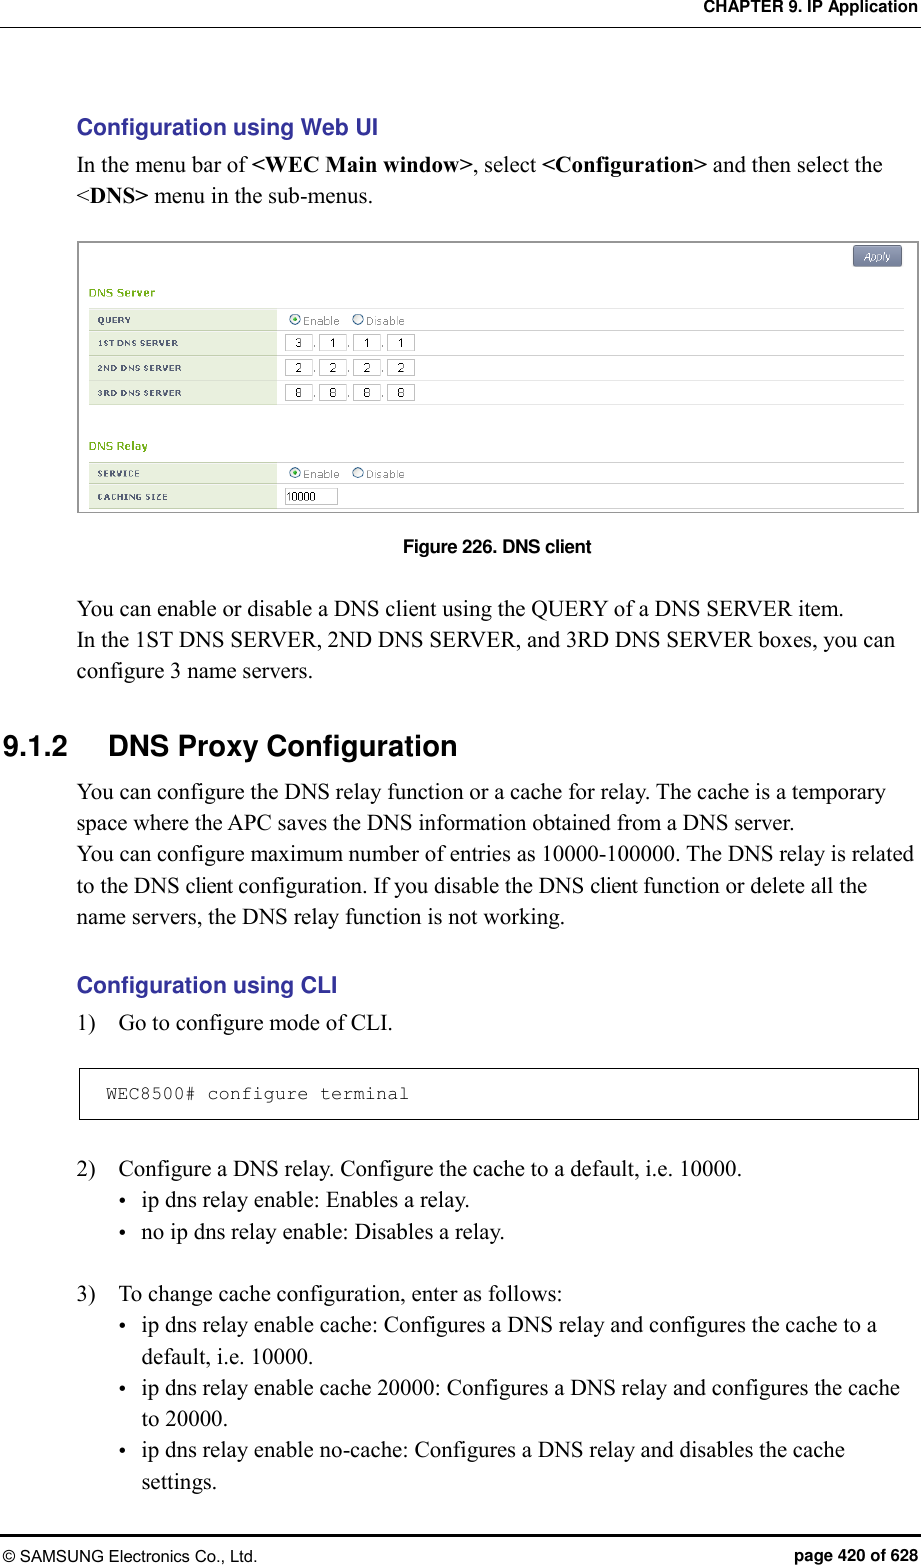 CHAPTER 9. IP Application © SAMSUNG Electronics Co., Ltd.  page 420 of 628 Configuration using Web UI In the menu bar of &lt;WEC Main window&gt;, select &lt;Configuration&gt; and then select the &lt;DNS&gt; menu in the sub-menus.  Figure 226. DNS client  You can enable or disable a DNS client using the QUERY of a DNS SERVER item. In the 1ST DNS SERVER, 2ND DNS SERVER, and 3RD DNS SERVER boxes, you can configure 3 name servers.  9.1.2  DNS Proxy Configuration You can configure the DNS relay function or a cache for relay. The cache is a temporary space where the APC saves the DNS information obtained from a DNS server.   You can configure maximum number of entries as 10000-100000. The DNS relay is related to the DNS client configuration. If you disable the DNS client function or delete all the name servers, the DNS relay function is not working.  Configuration using CLI 1)    Go to configure mode of CLI.  WEC8500# configure terminal  2)    Configure a DNS relay. Configure the cache to a default, i.e. 10000.  ip dns relay enable: Enables a relay.  no ip dns relay enable: Disables a relay.  3)    To change cache configuration, enter as follows:  ip dns relay enable cache: Configures a DNS relay and configures the cache to a default, i.e. 10000.  ip dns relay enable cache 20000: Configures a DNS relay and configures the cache to 20000.  ip dns relay enable no-cache: Configures a DNS relay and disables the cache settings. 